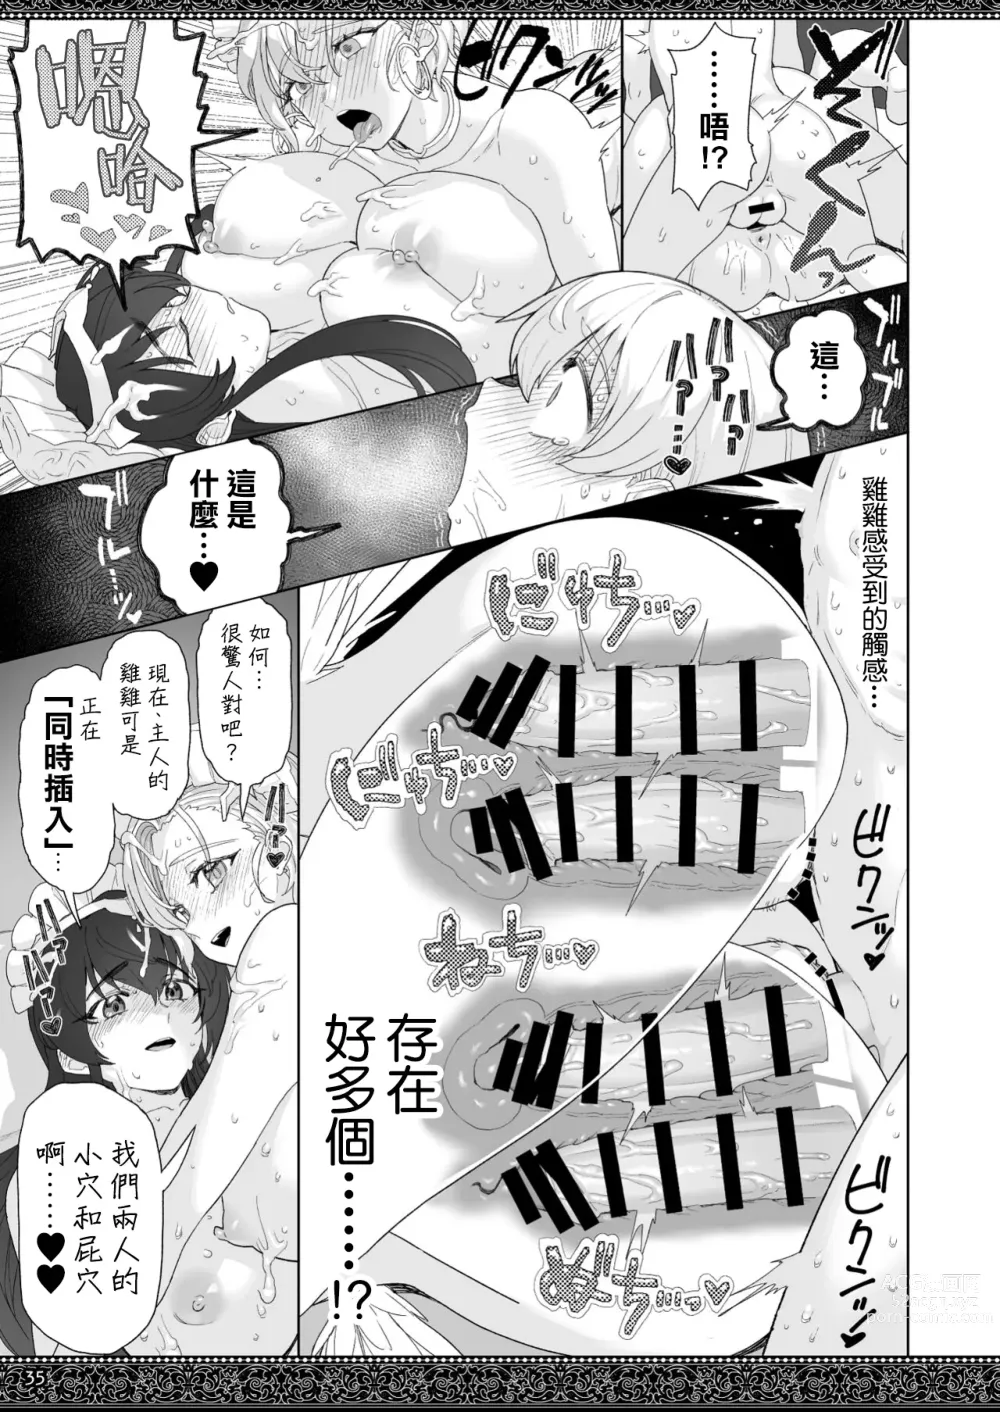 Page 35 of doujinshi 天上世界的女僕們